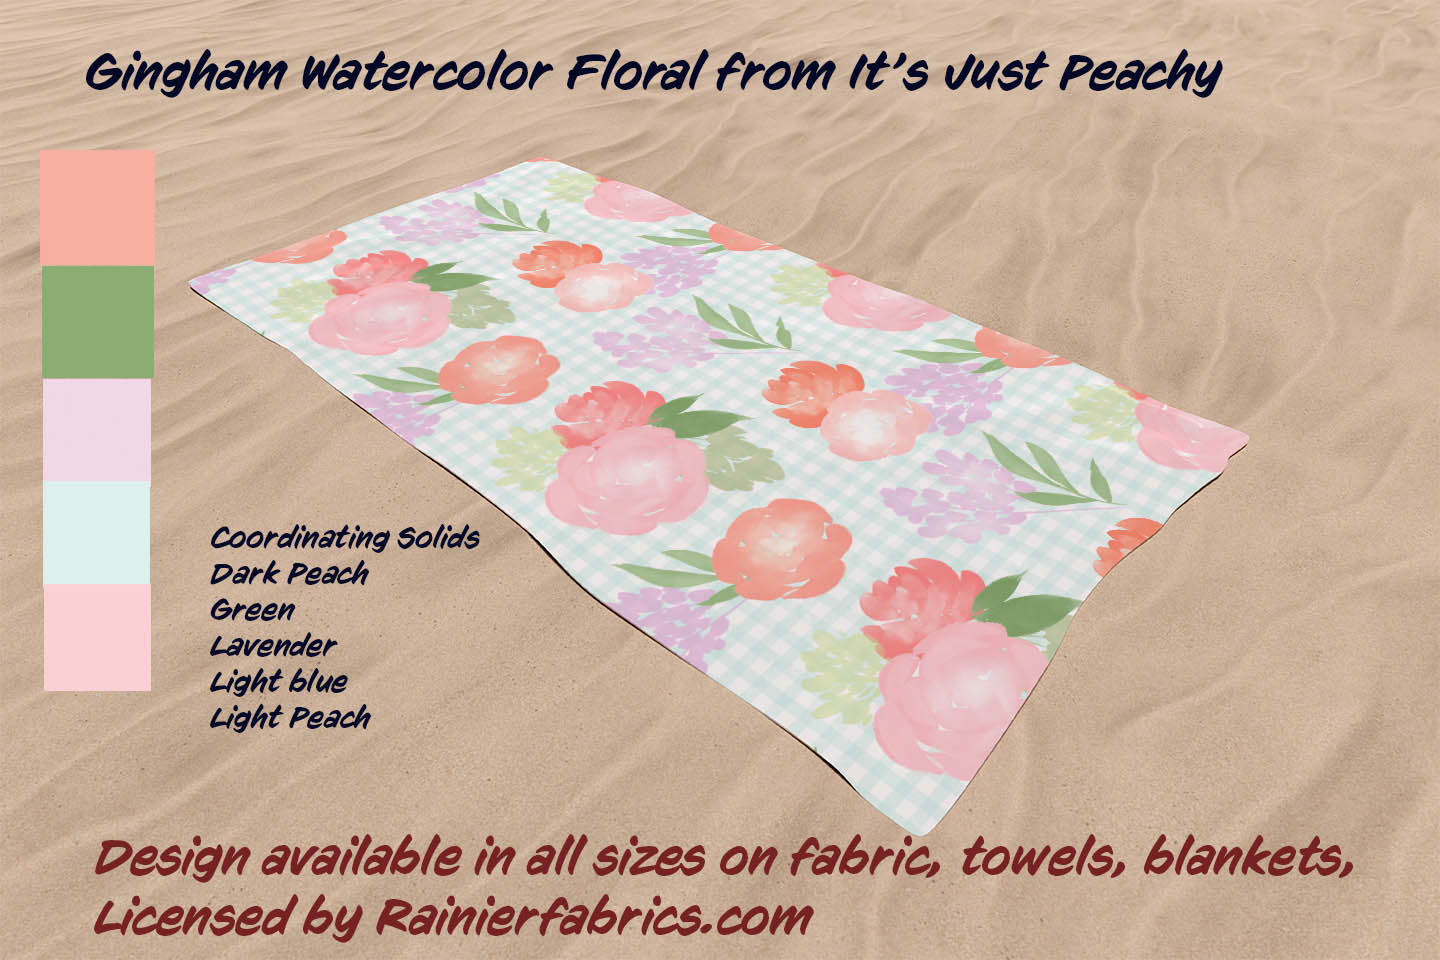 Gingham Watercolor Floral from It's Just Peachy Designs - 2-5 day turnaround - Order by 1/2 yard; Description of bases below